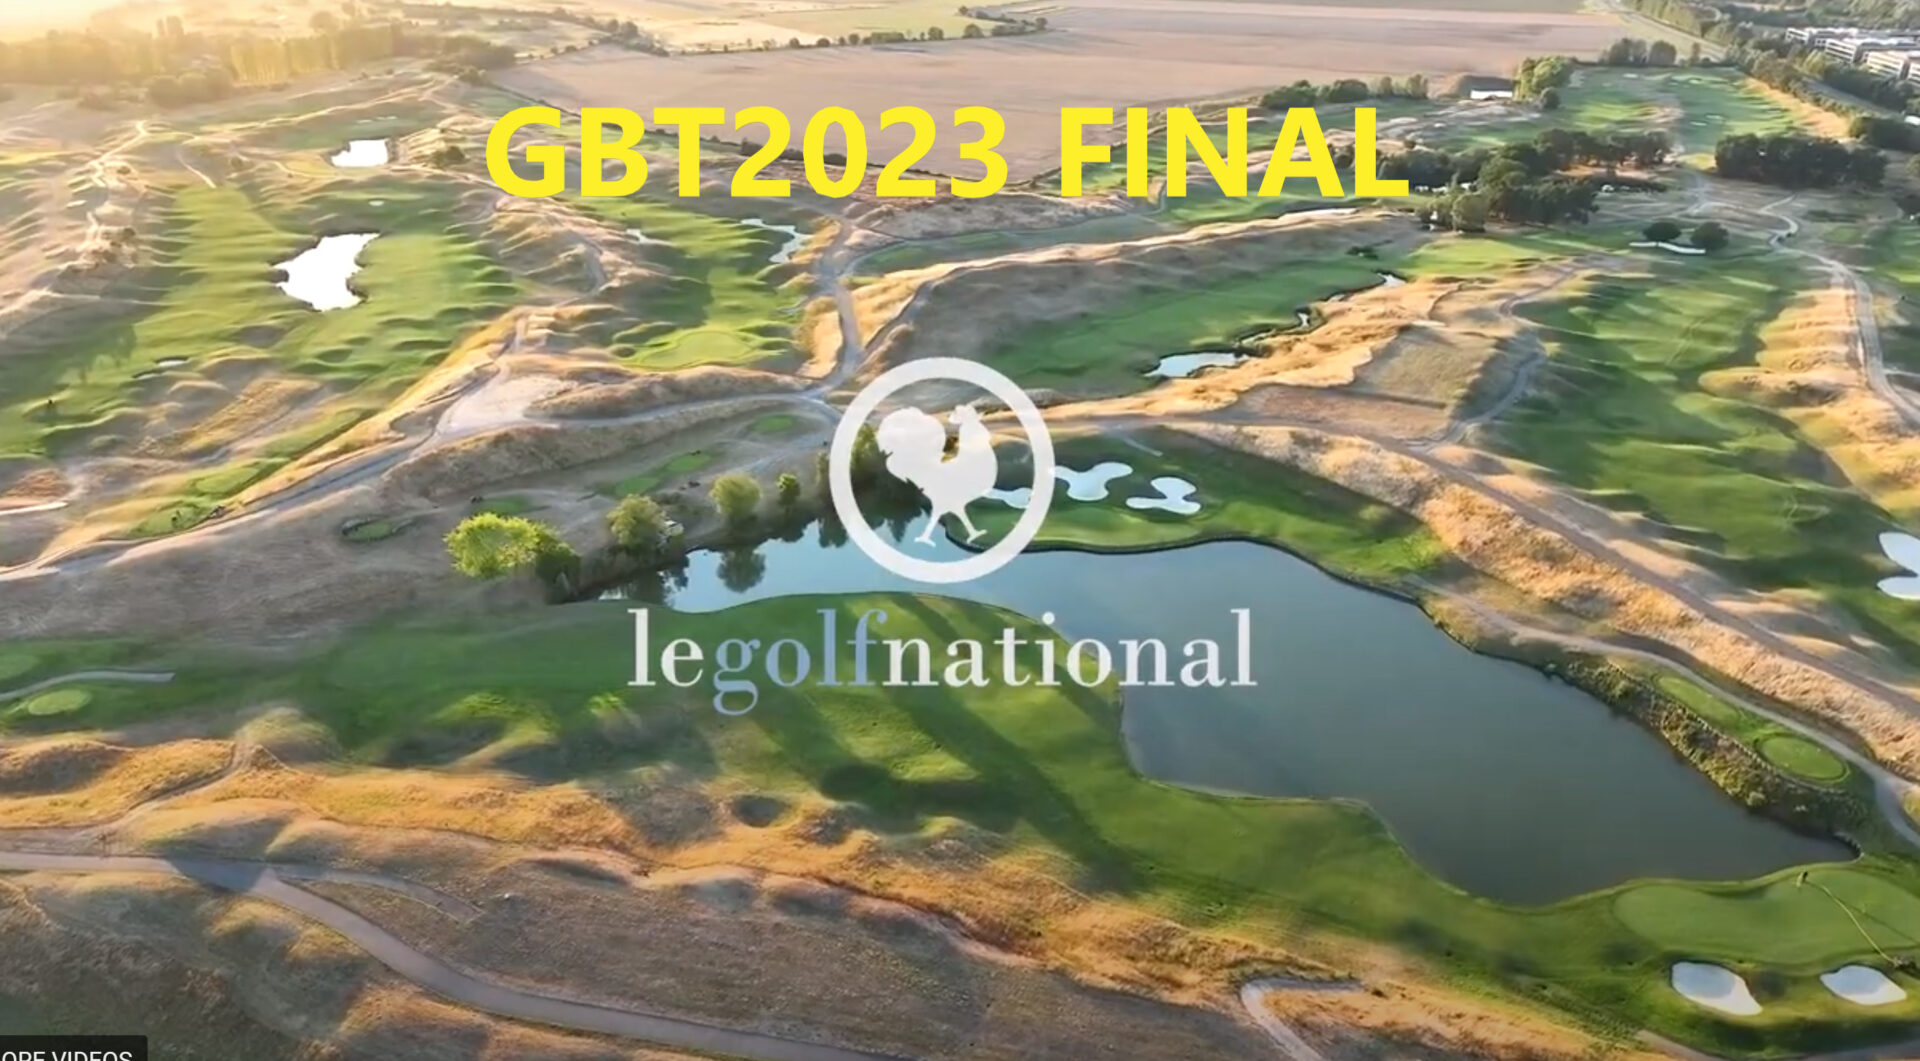 Le Golf Nationale_Final Home Page Banner